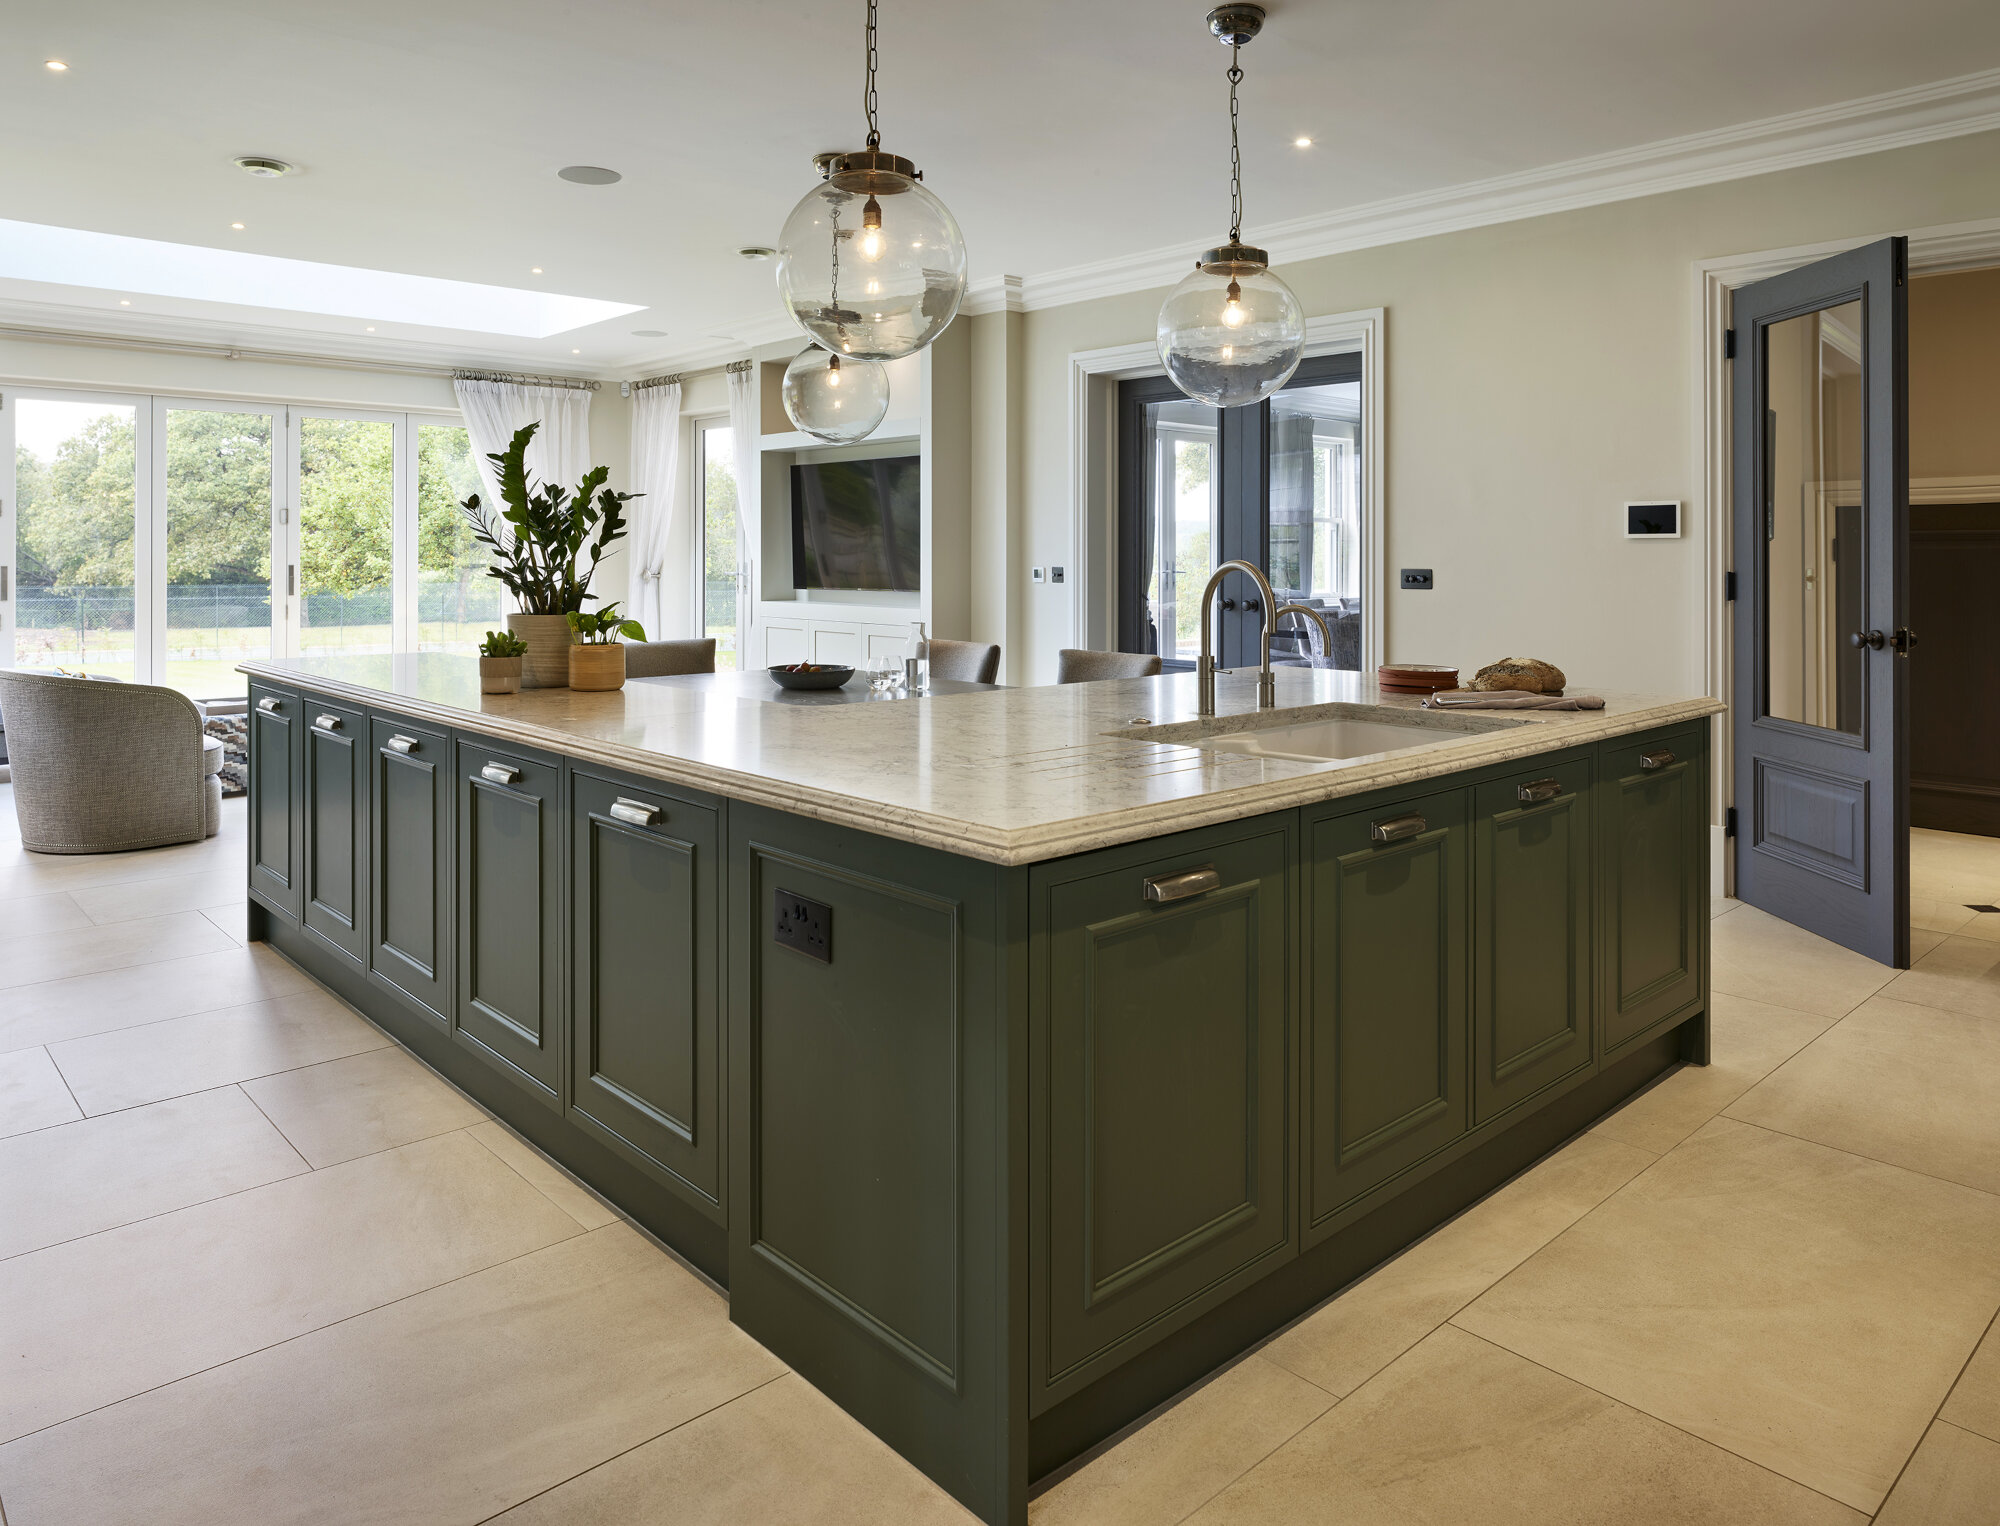 High End traditional Kitchens In Market Warsop